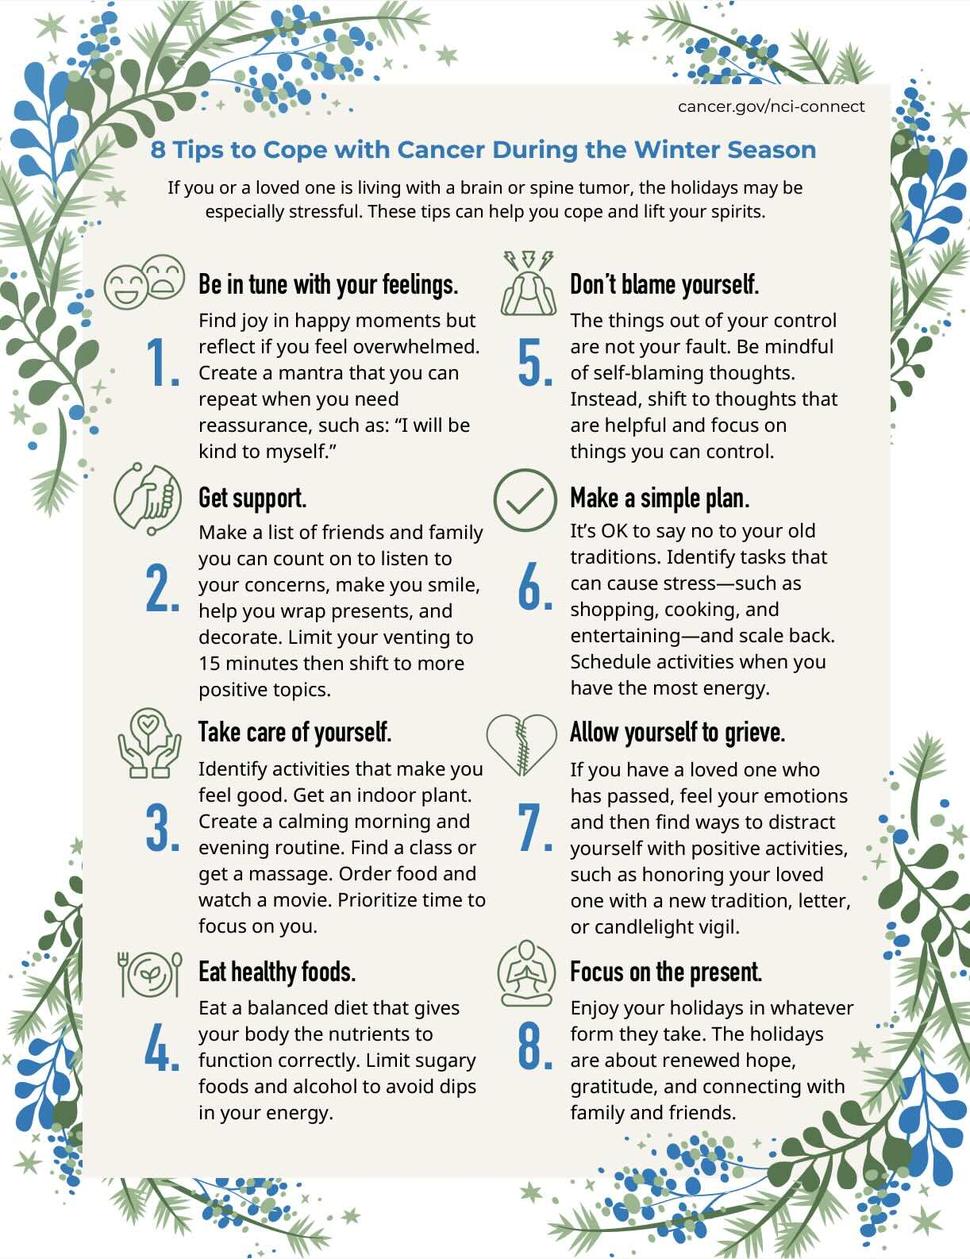 Screenshot of the "8 Tips to Cope with Cancer During the Winter Season" downloadable flyer